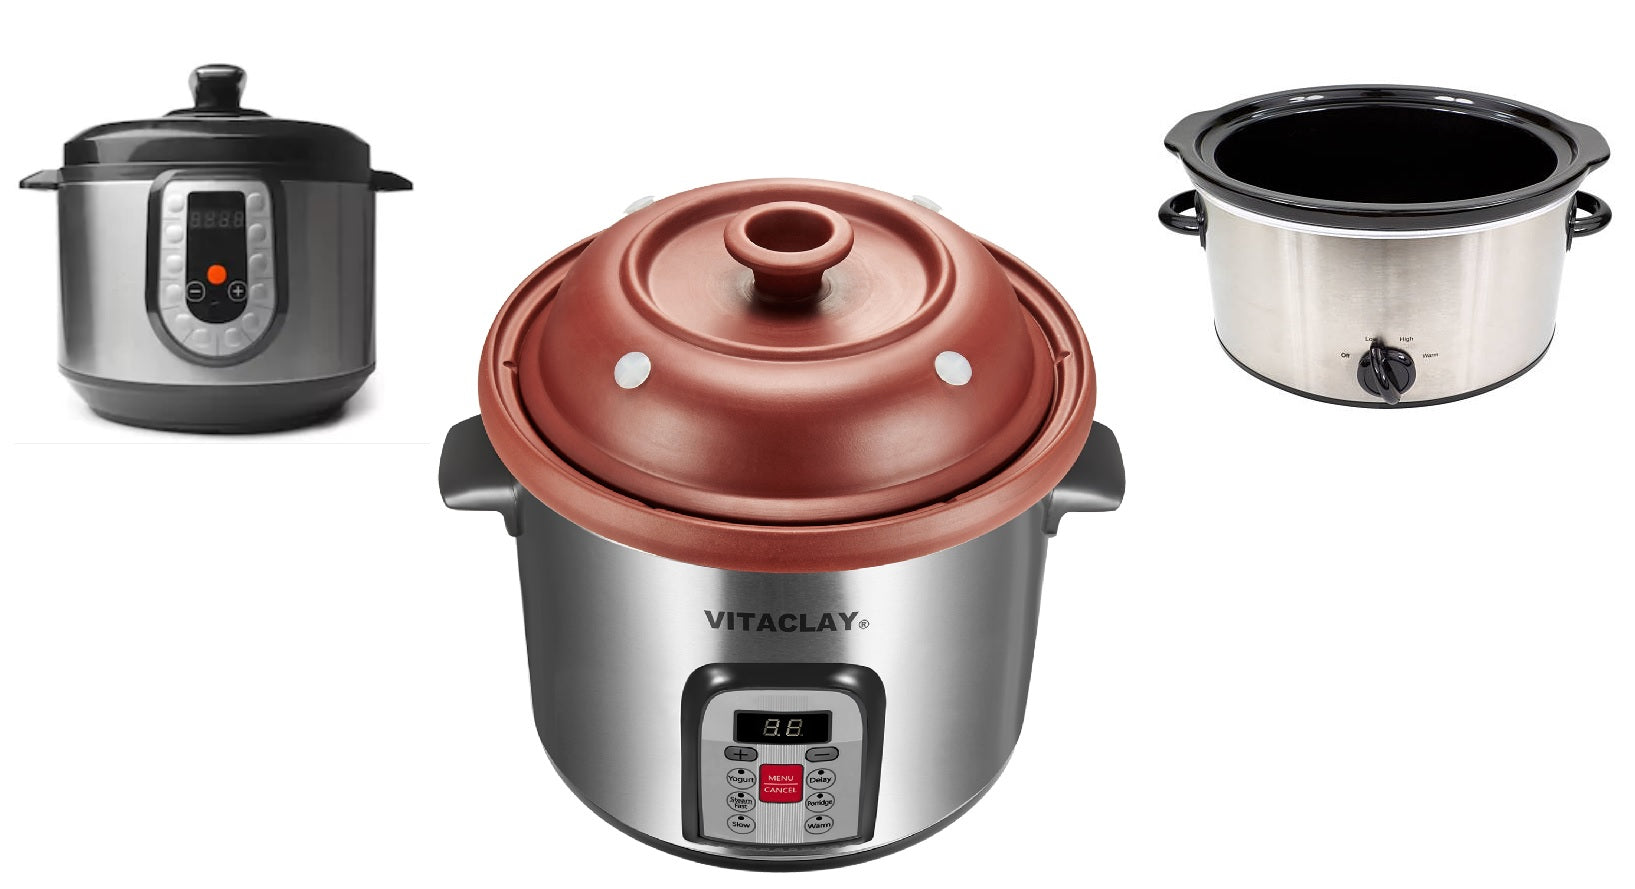 Instant Pot vs Crock-Pot: Which One Is Better?